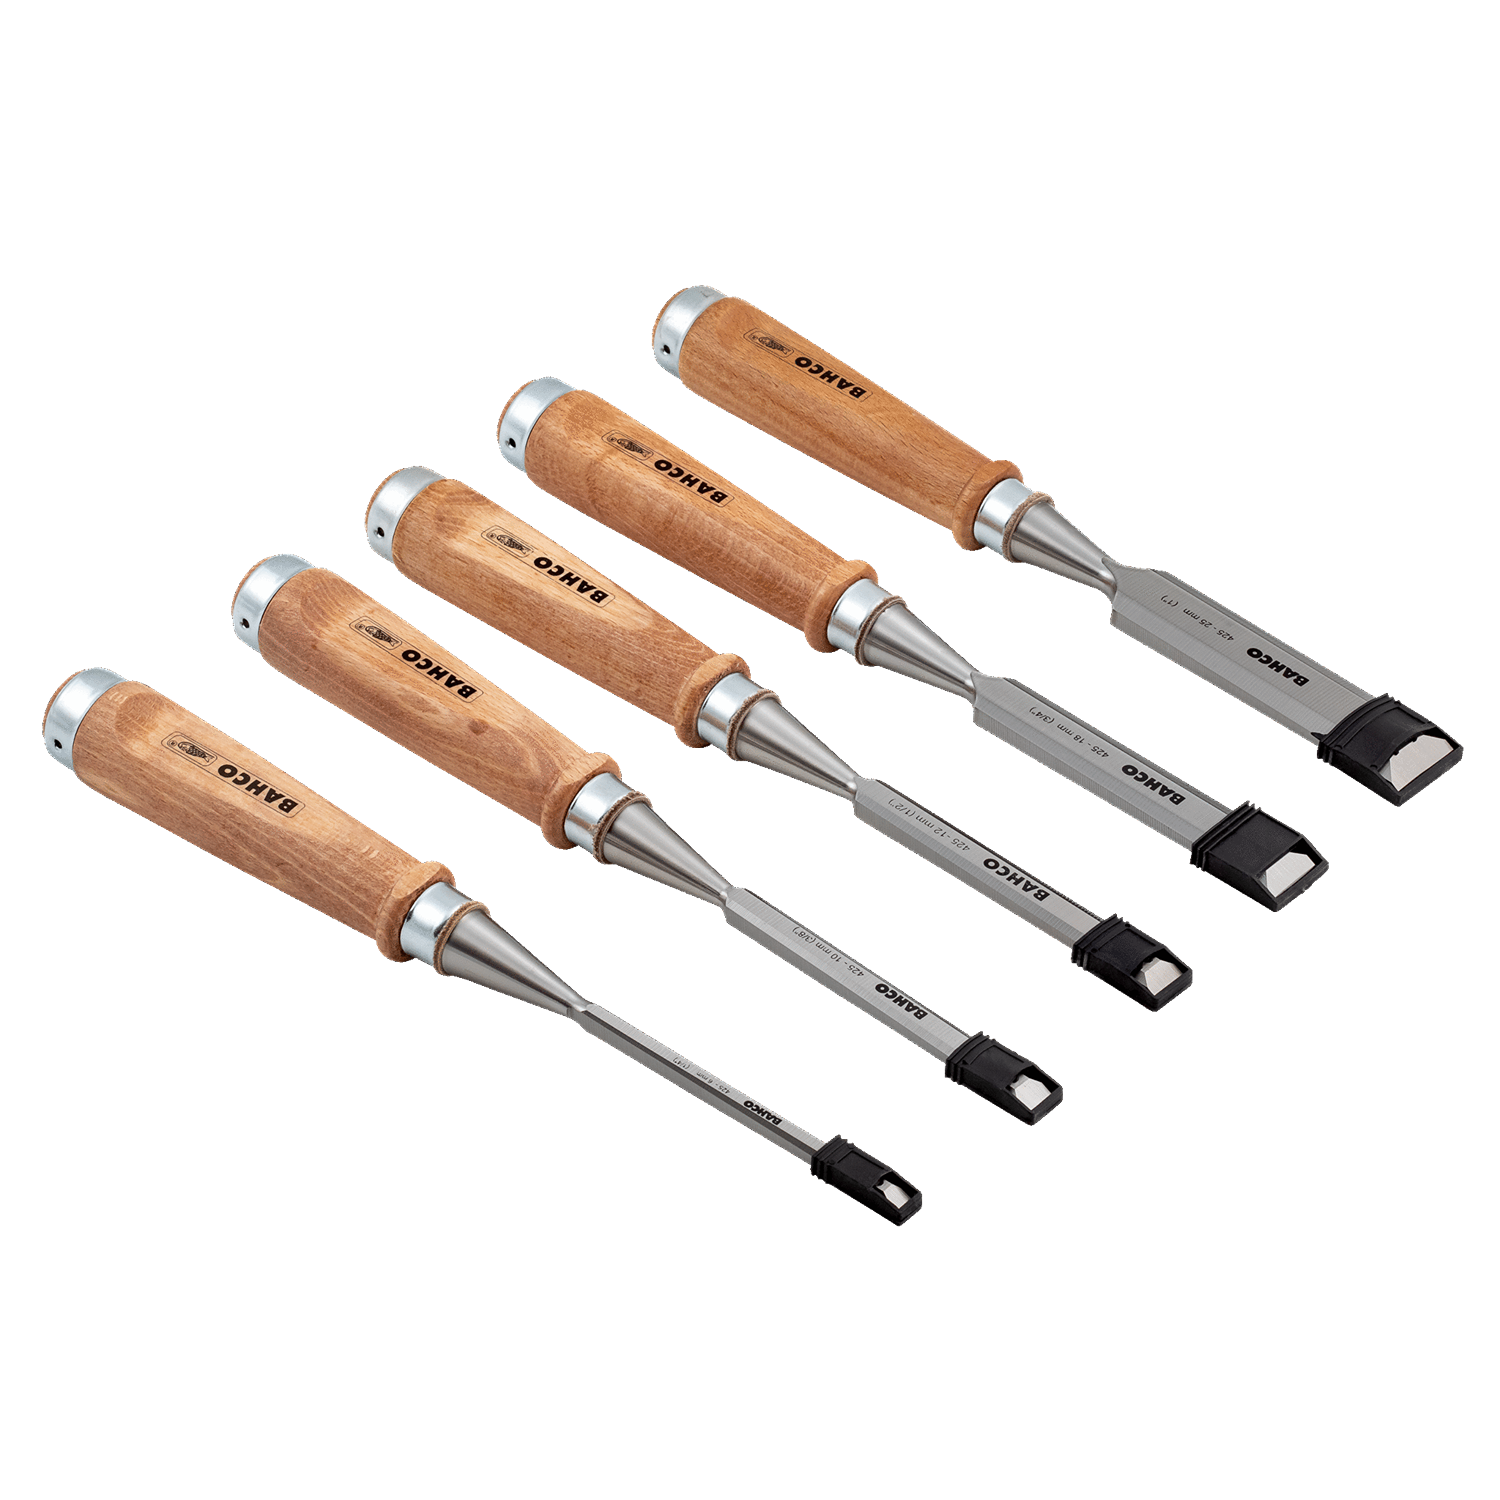 BAHCO 425-082 Chisel Set With Wooden Handle - 5 Pcs/Cardboard Box - Premium Chisel Set from BAHCO - Shop now at Yew Aik.